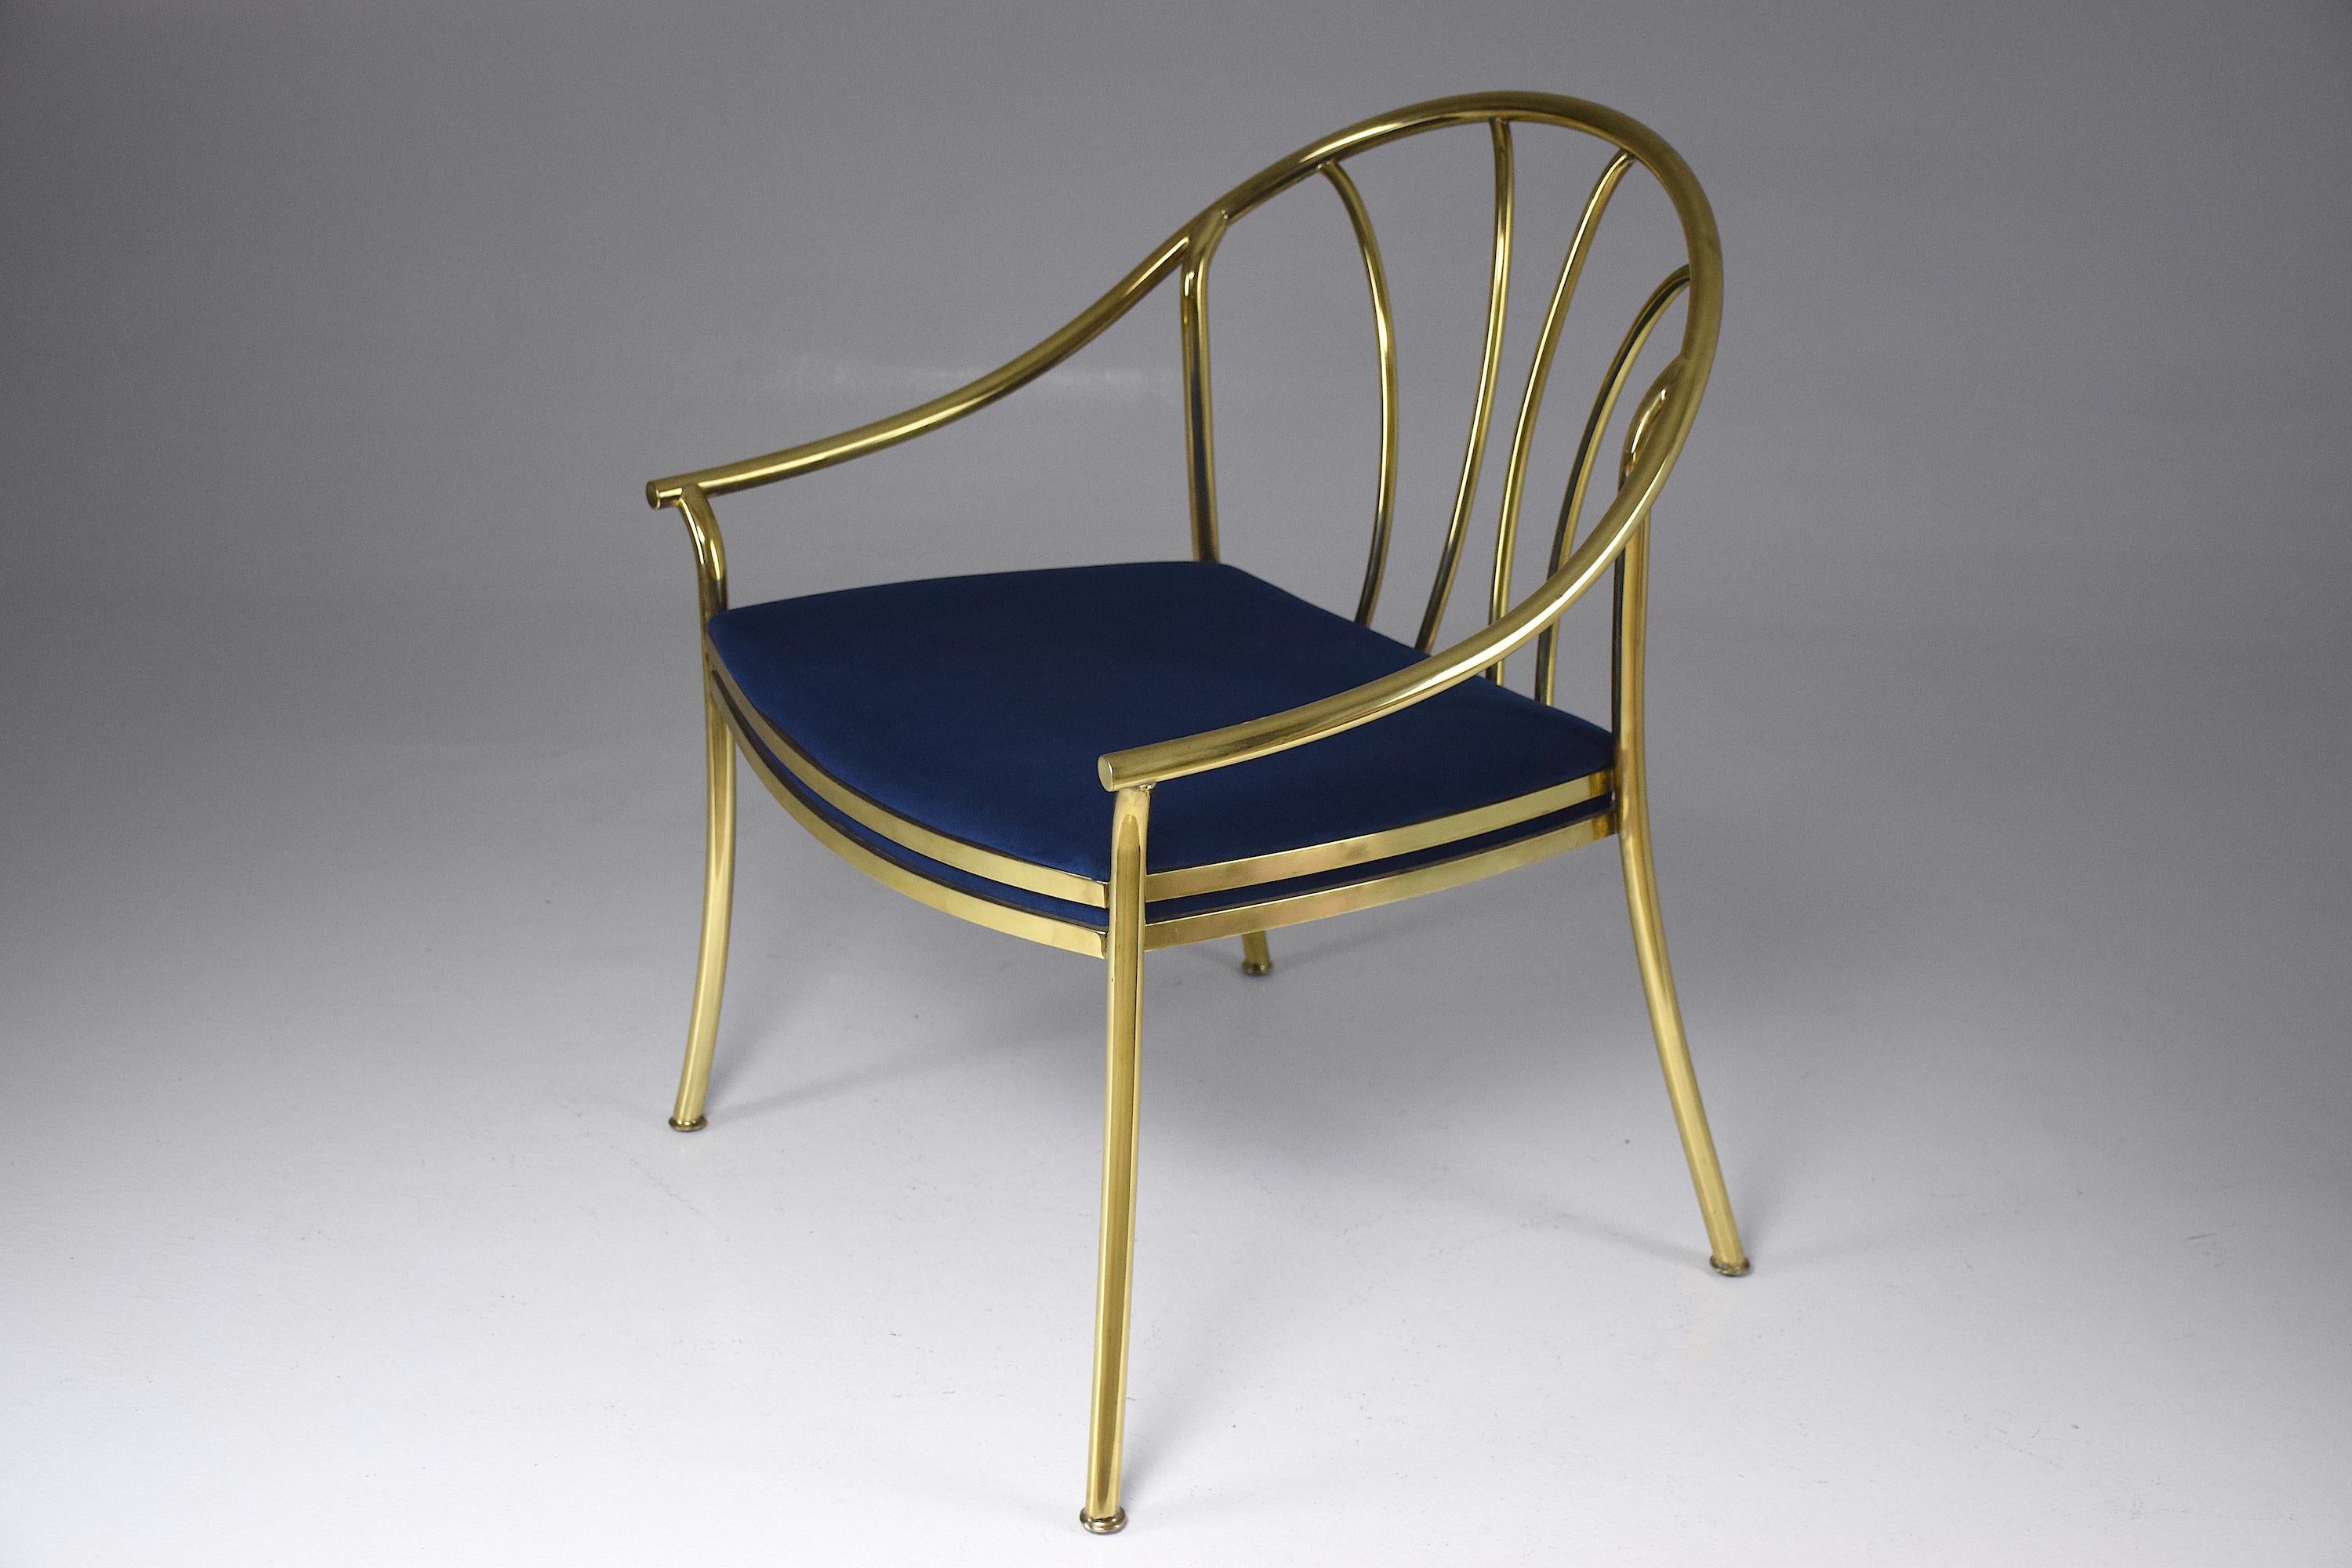 A beautifully crafted 20th-century statement large vintage armchair or side accent chair composed of polished solid gold brass and designed with a curve rounded backrest, panels and splayed legs. We have fully restored the chair through new